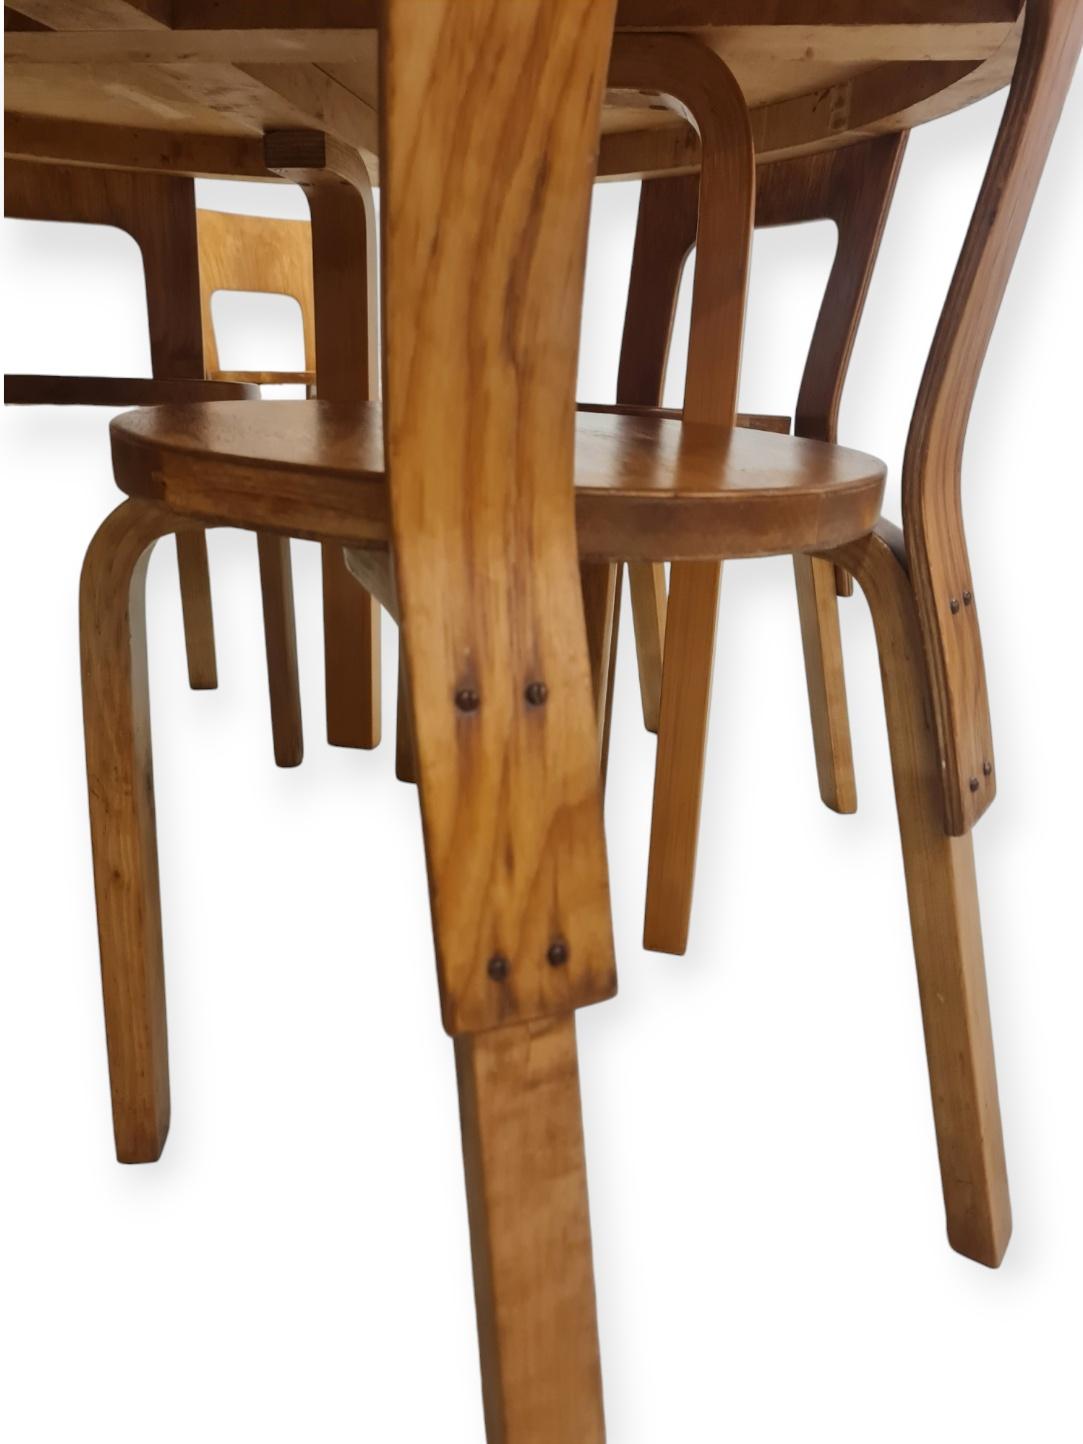 Mid-20th Century Alvar Aalto Dining Set with Lazy Susan and 6 Model 66 chairs, 1940s For Sale